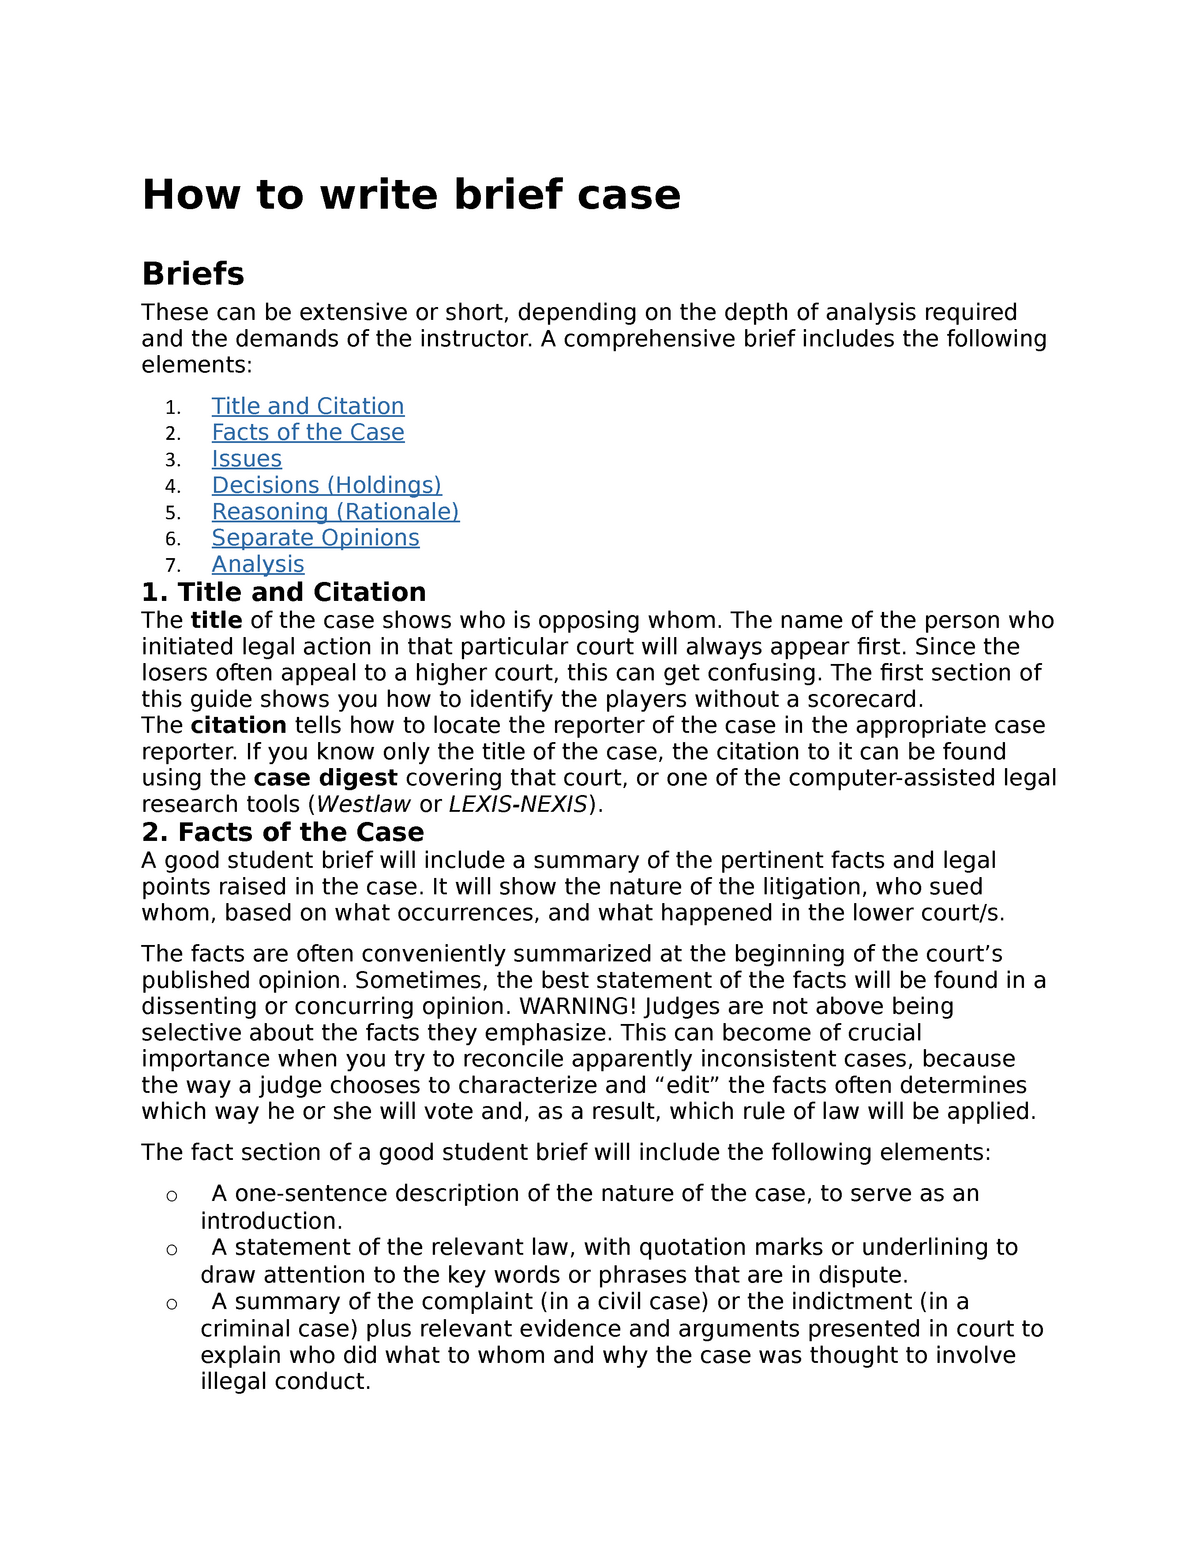 case-brief-template-04-how-to-write-brief-case-briefs-these-can-be-extensive-or-short